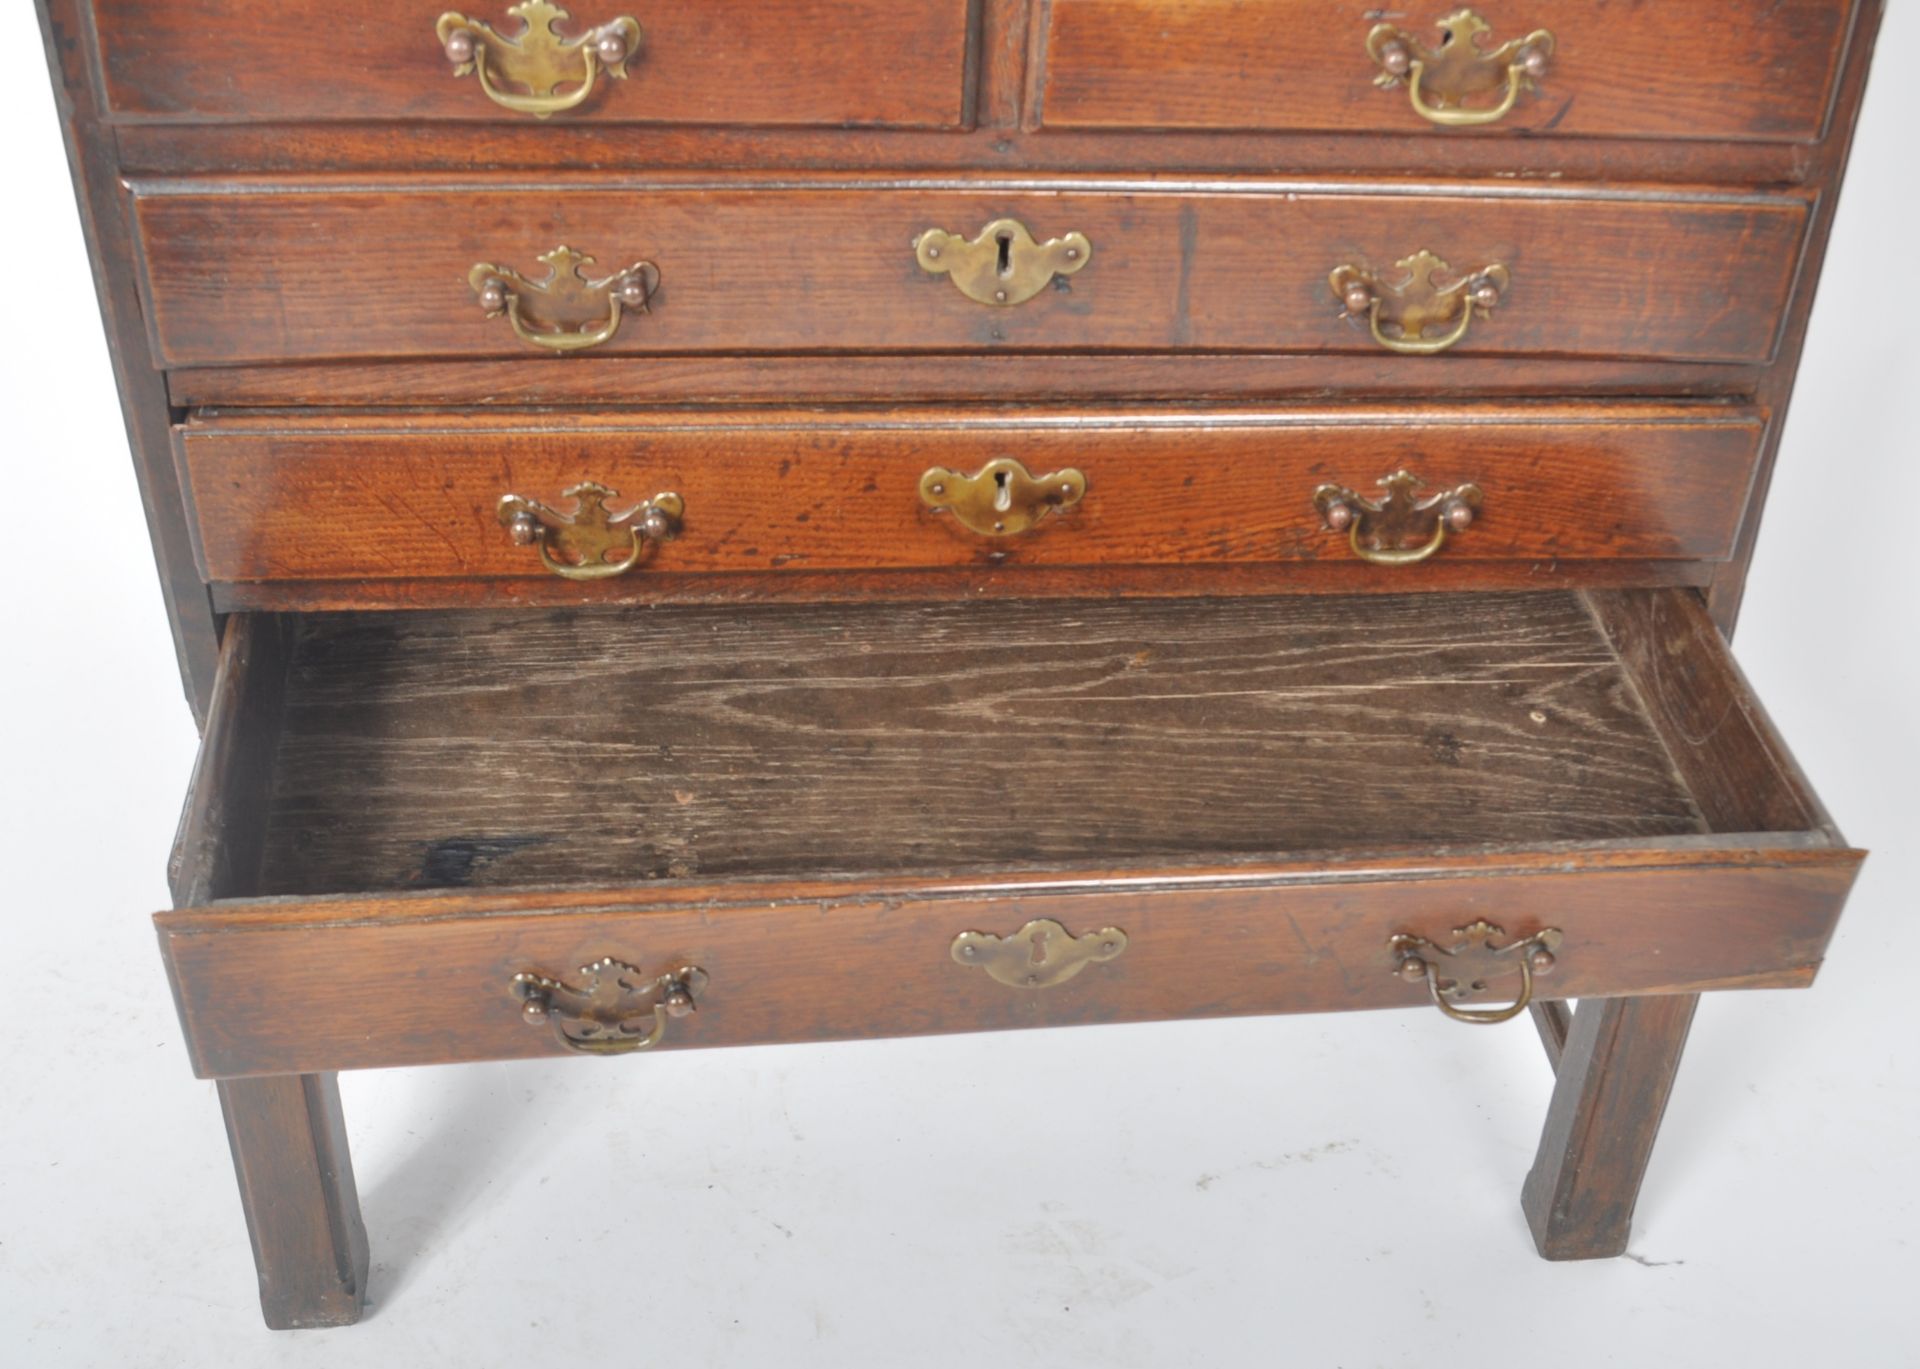 RARE 18TH CENTURY MINIATURE CHEST ON STAND - Image 6 of 9